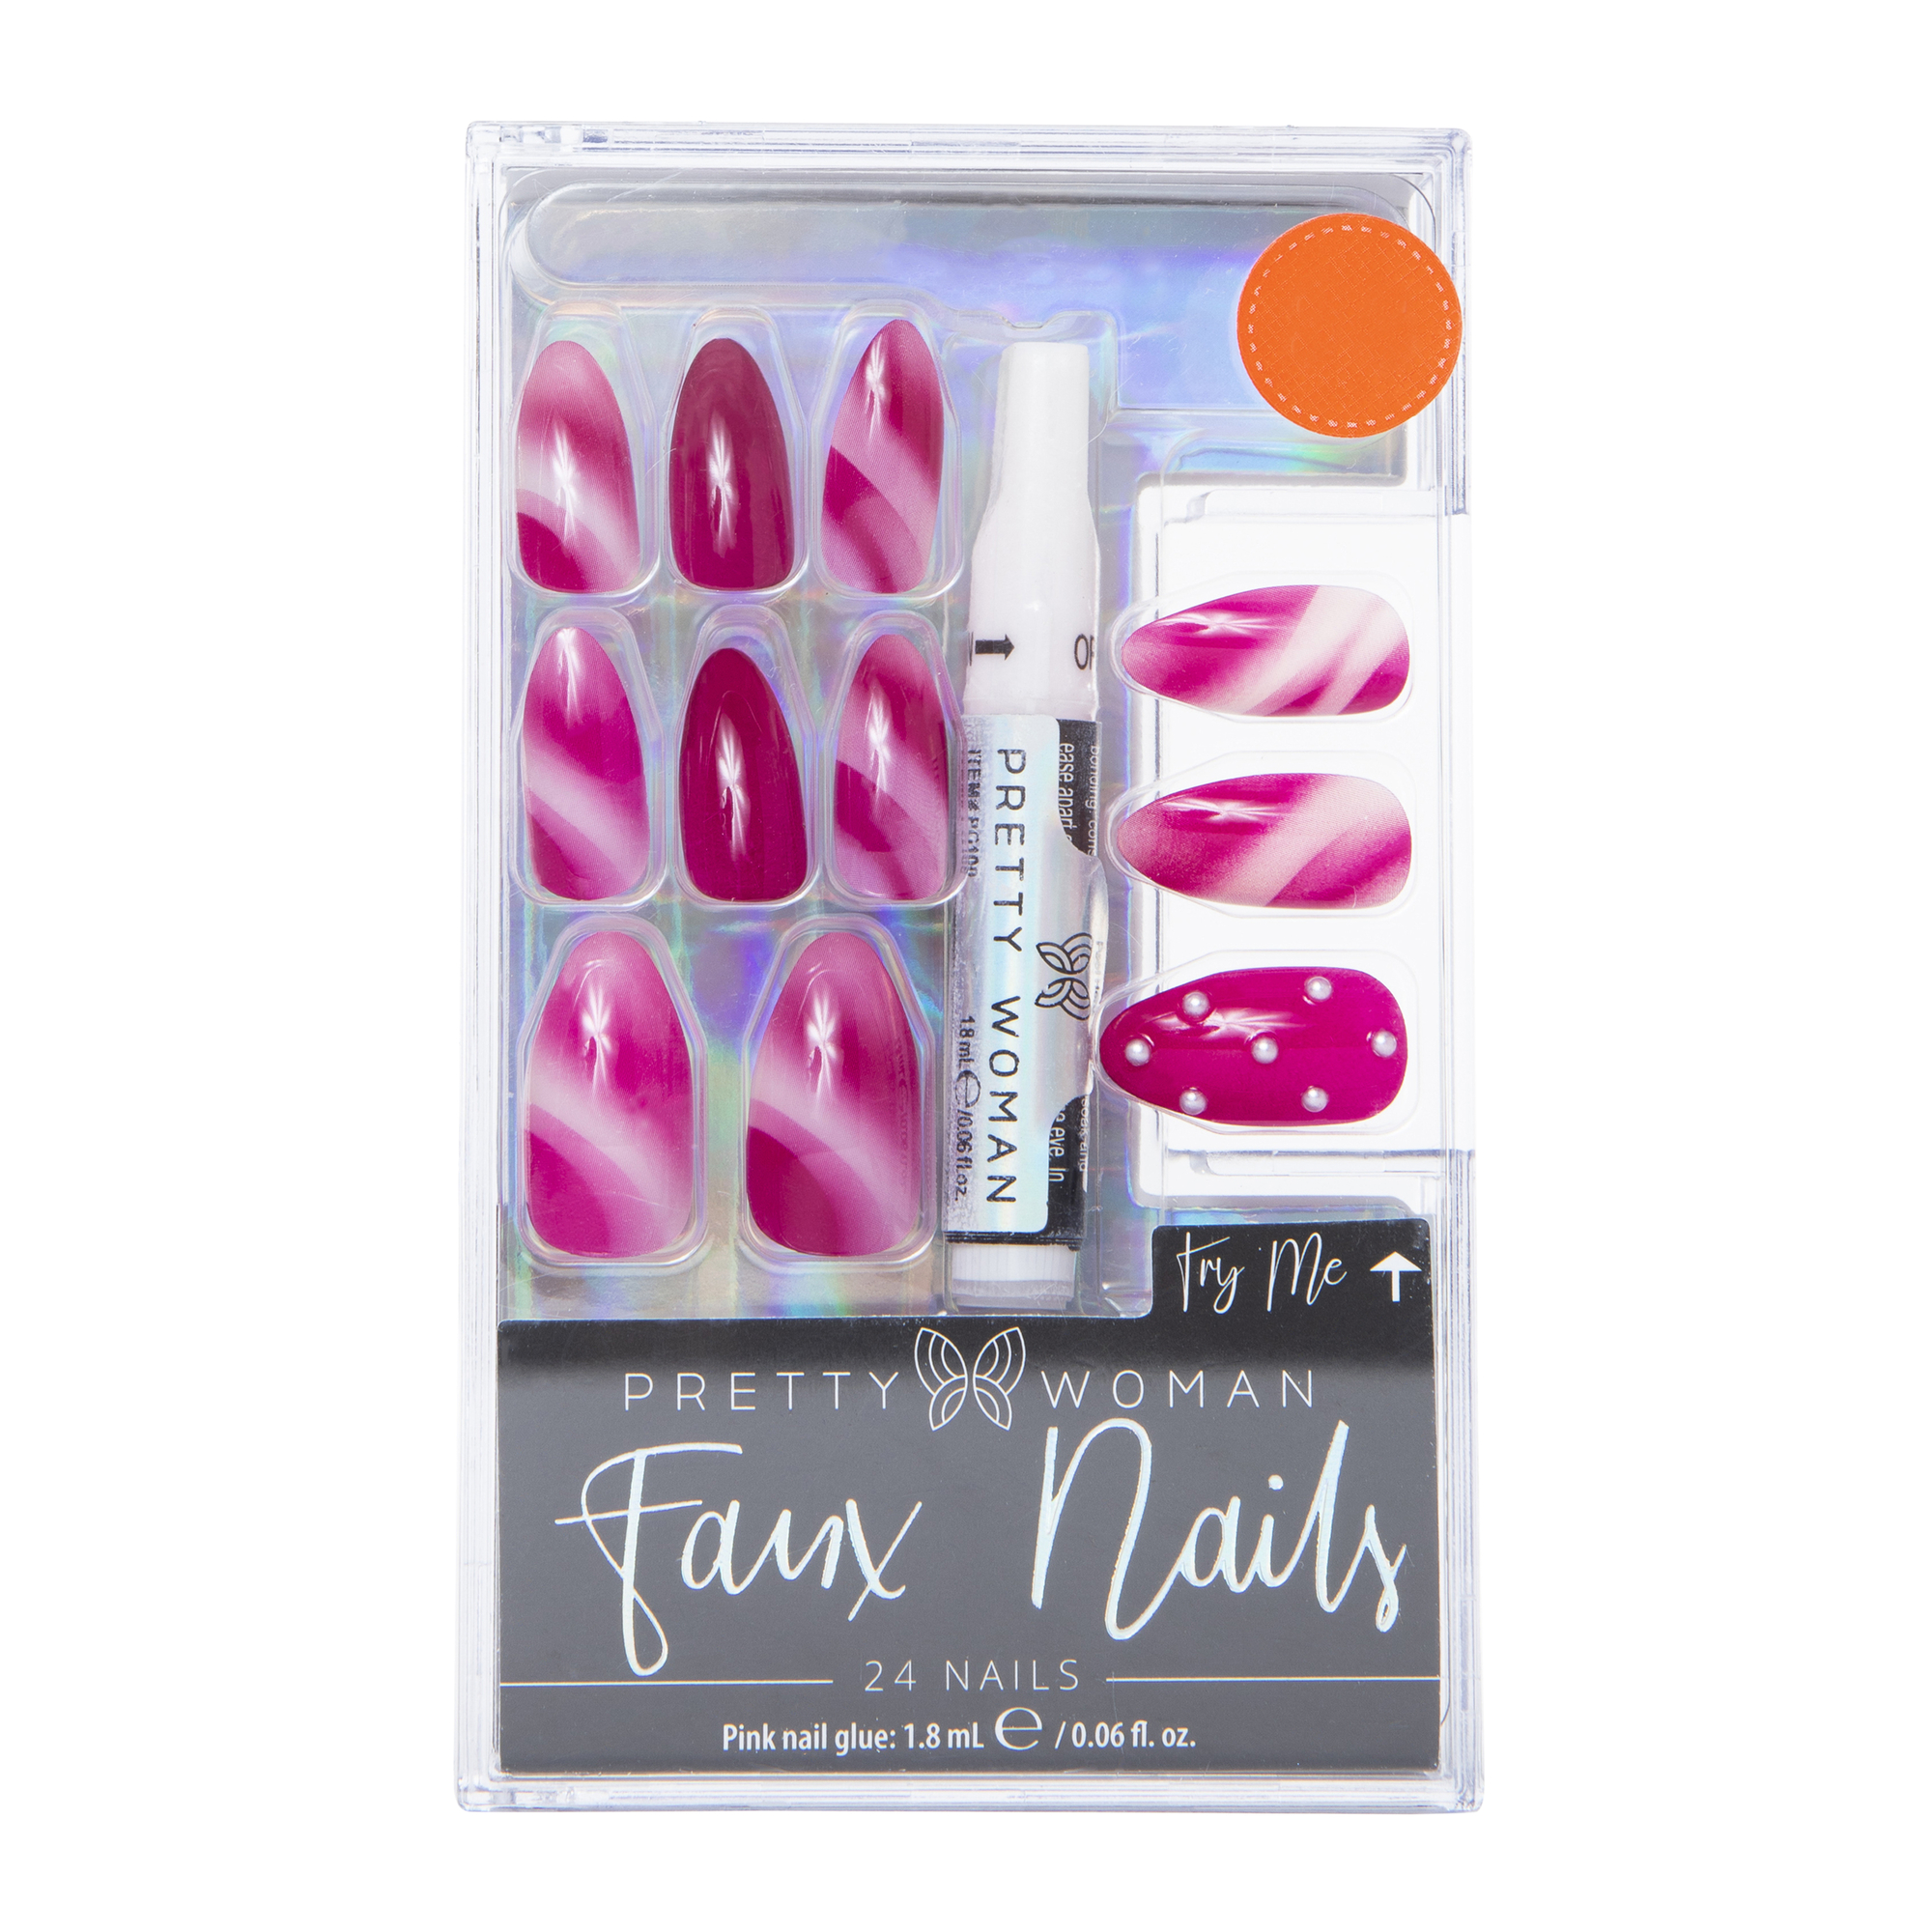 fake nails, nails set, press on cheap faux affordable manicure, pastel stiletto